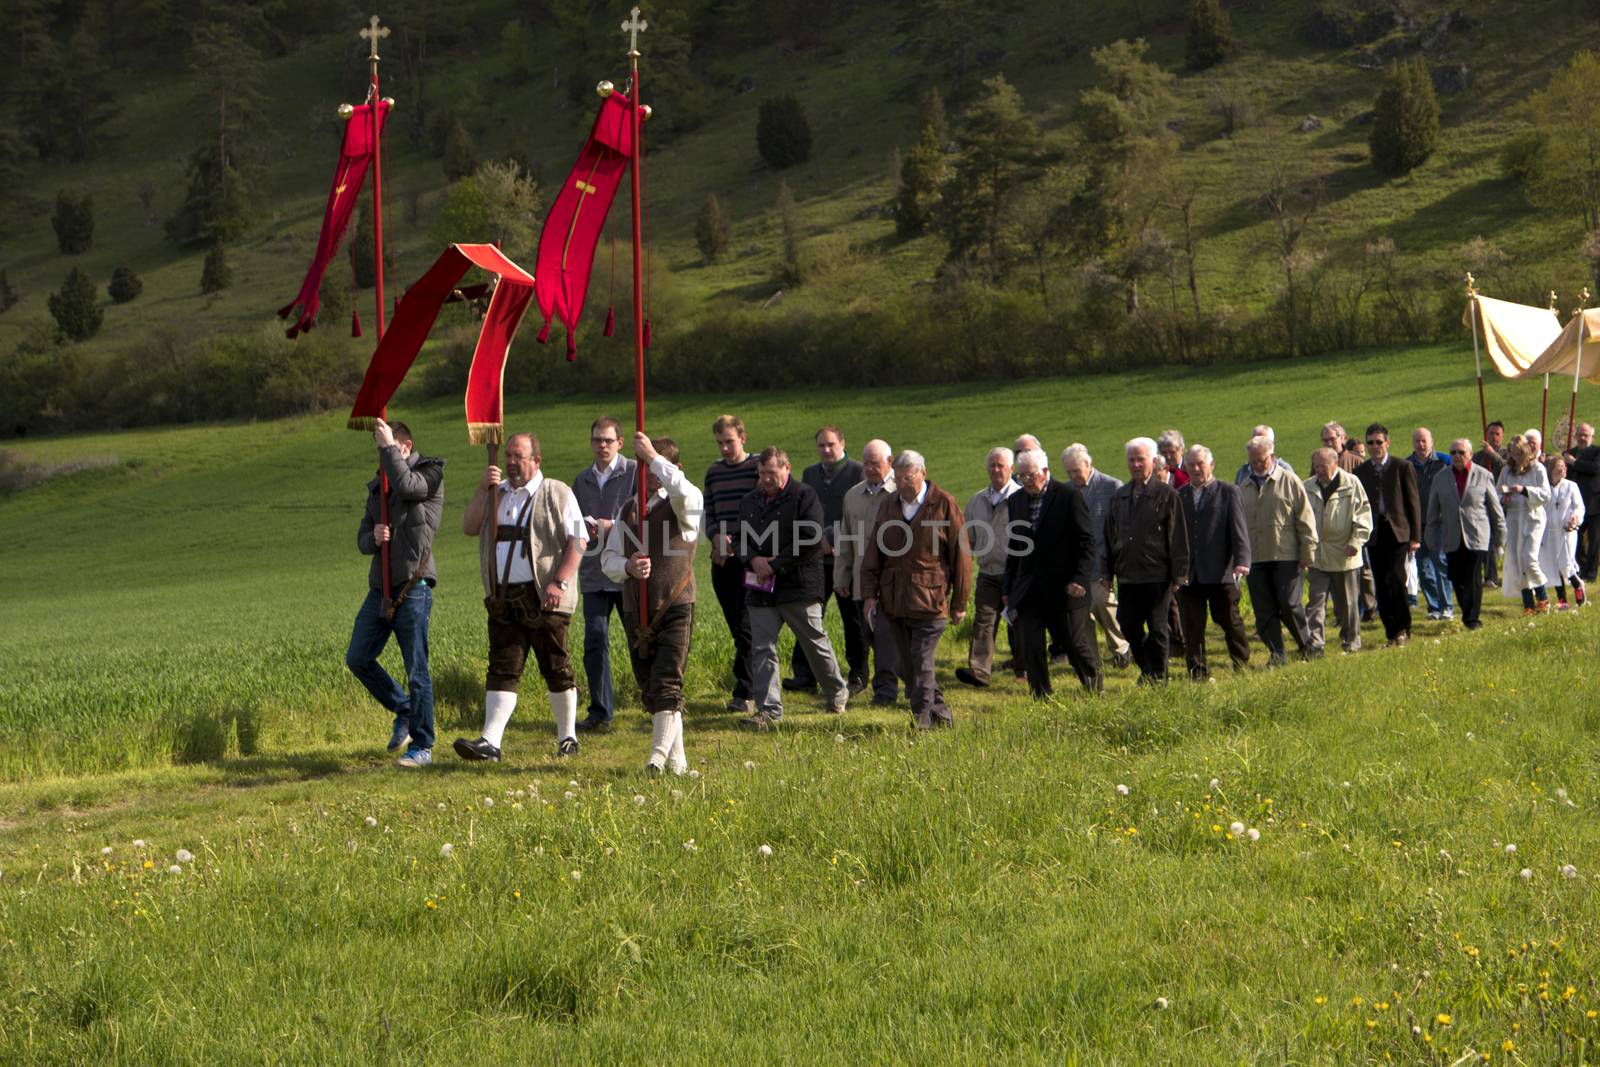 Ascension Day Procession in Bavaria in Germany by 3quarks